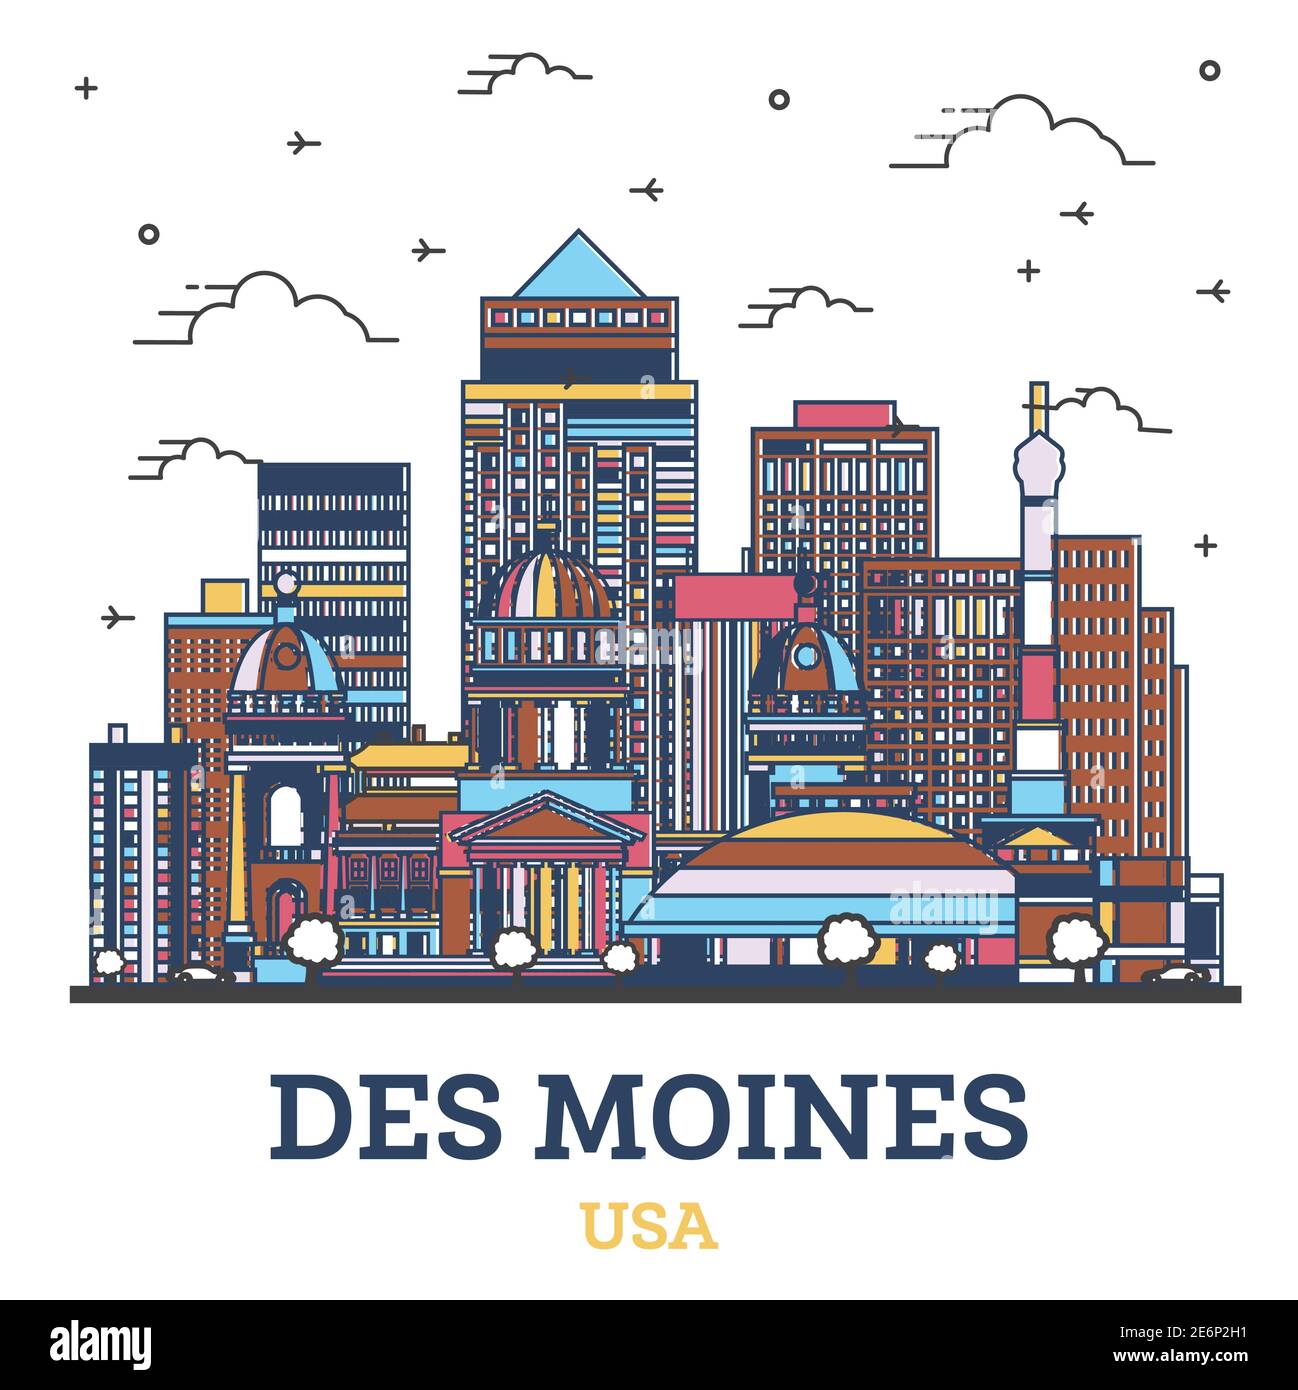 Outline Des Moines Iowa City Skyline with Colored Modern Buildings Isolated on White. Vector Illustration. Des Moines USA Cityscape with Landmarks. Stock Vector